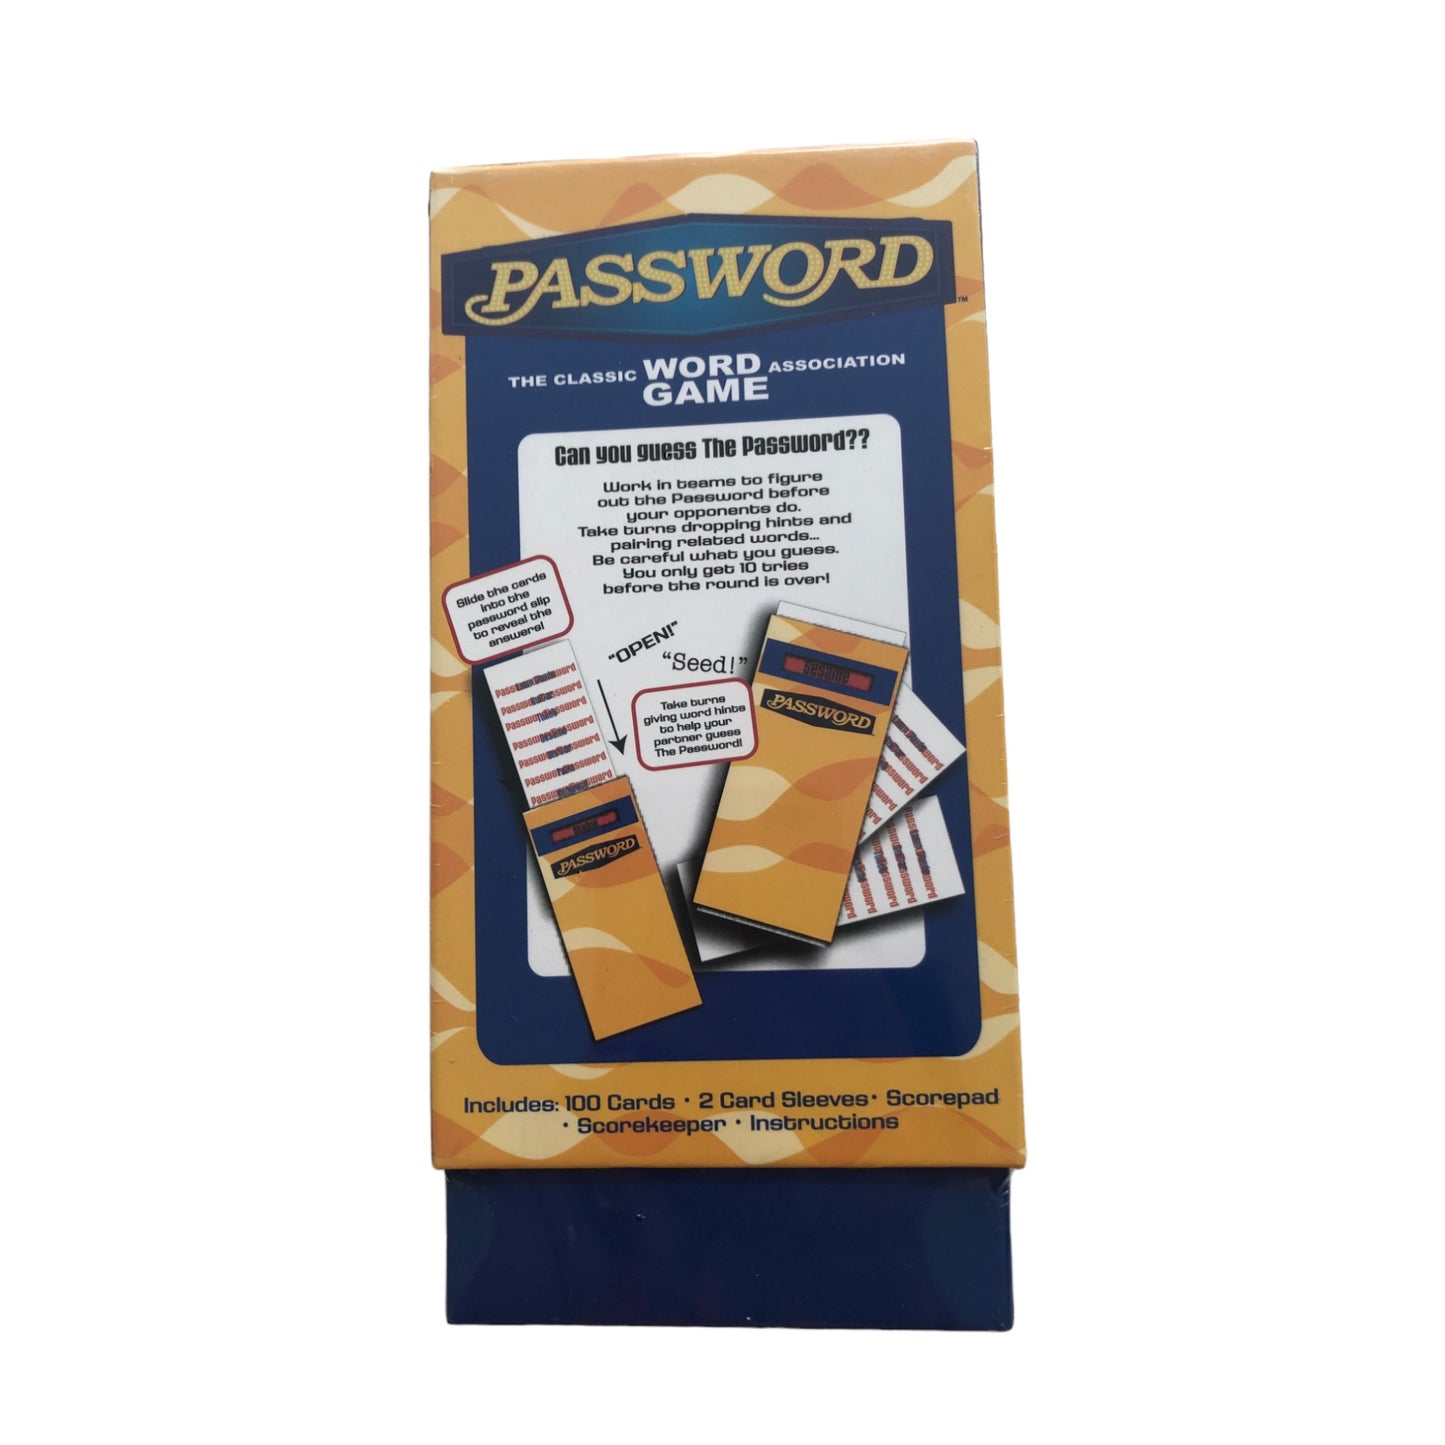 Password - The classic word game association